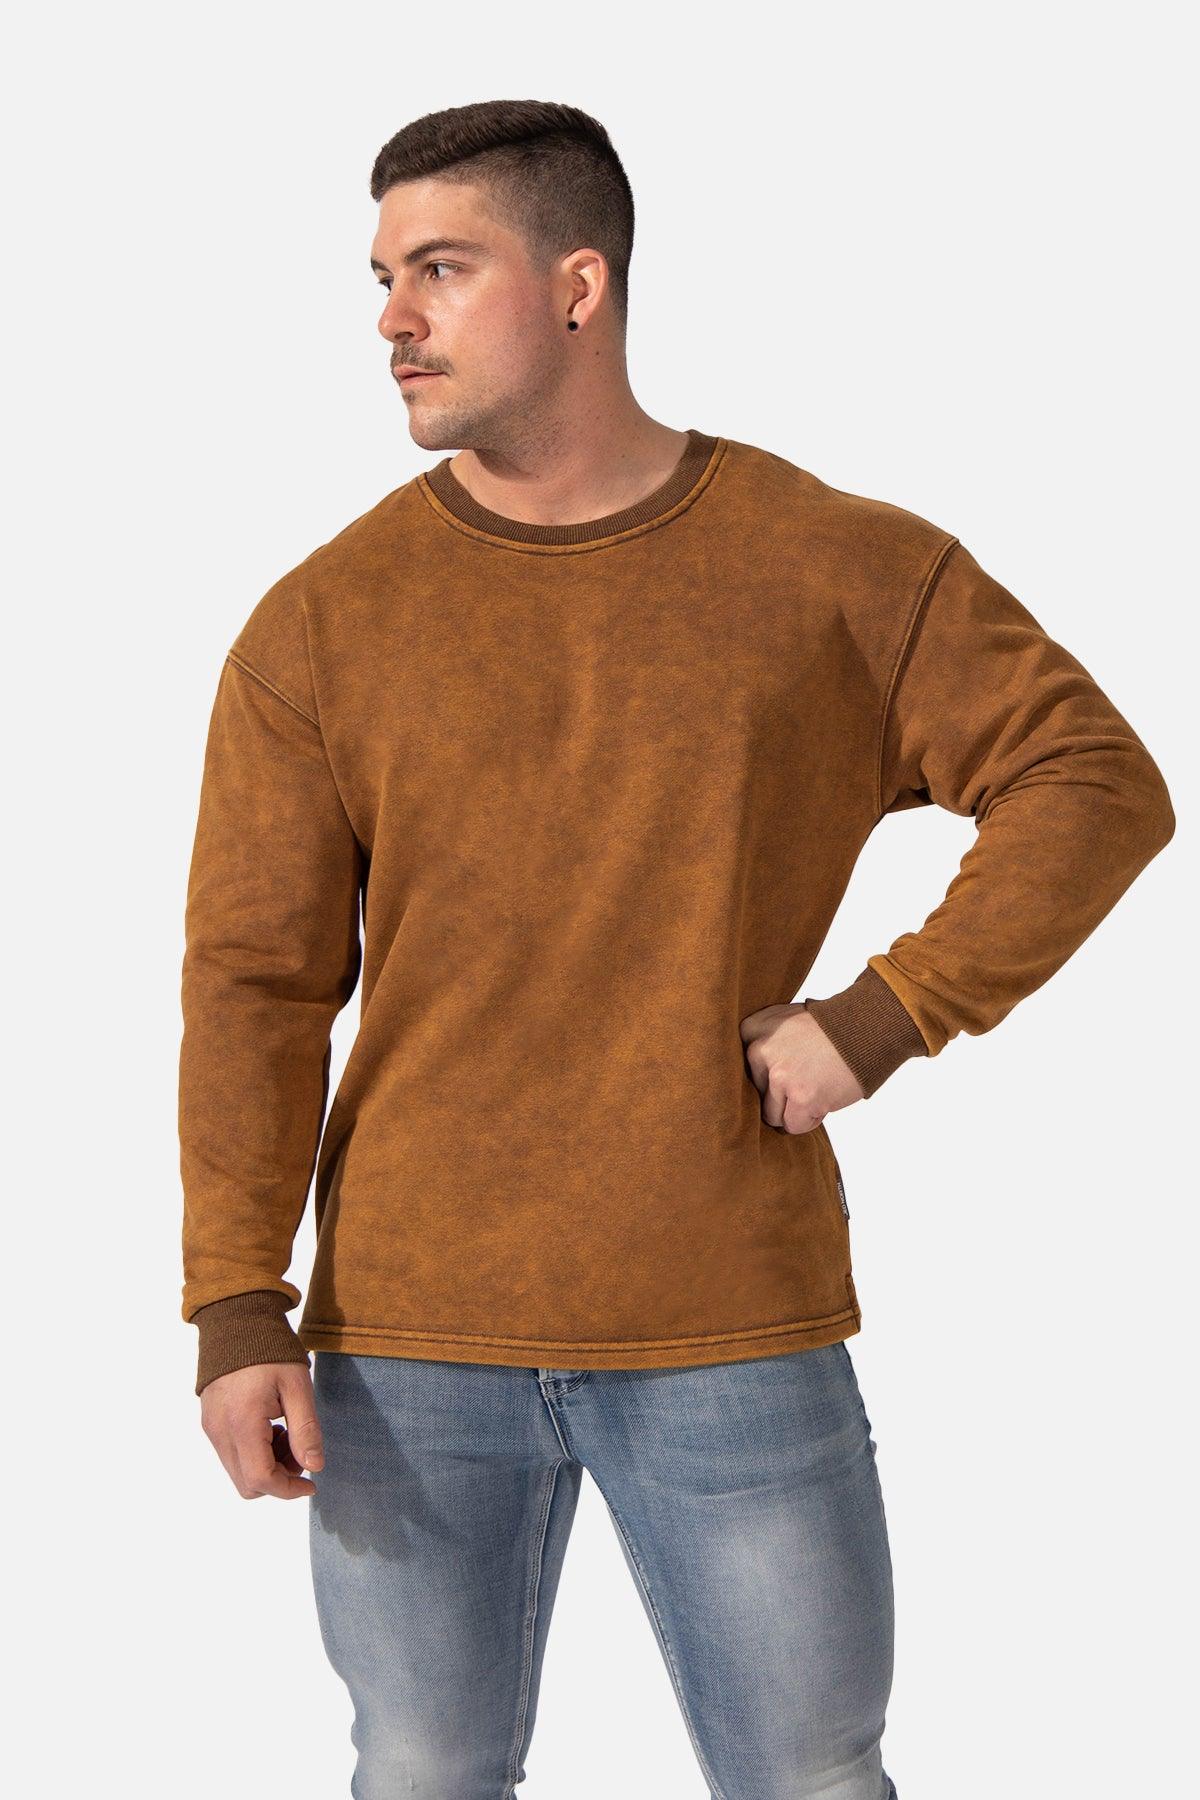 Certified Oversized Crewneck Sweater - Vintage Wash Brown - Jed North